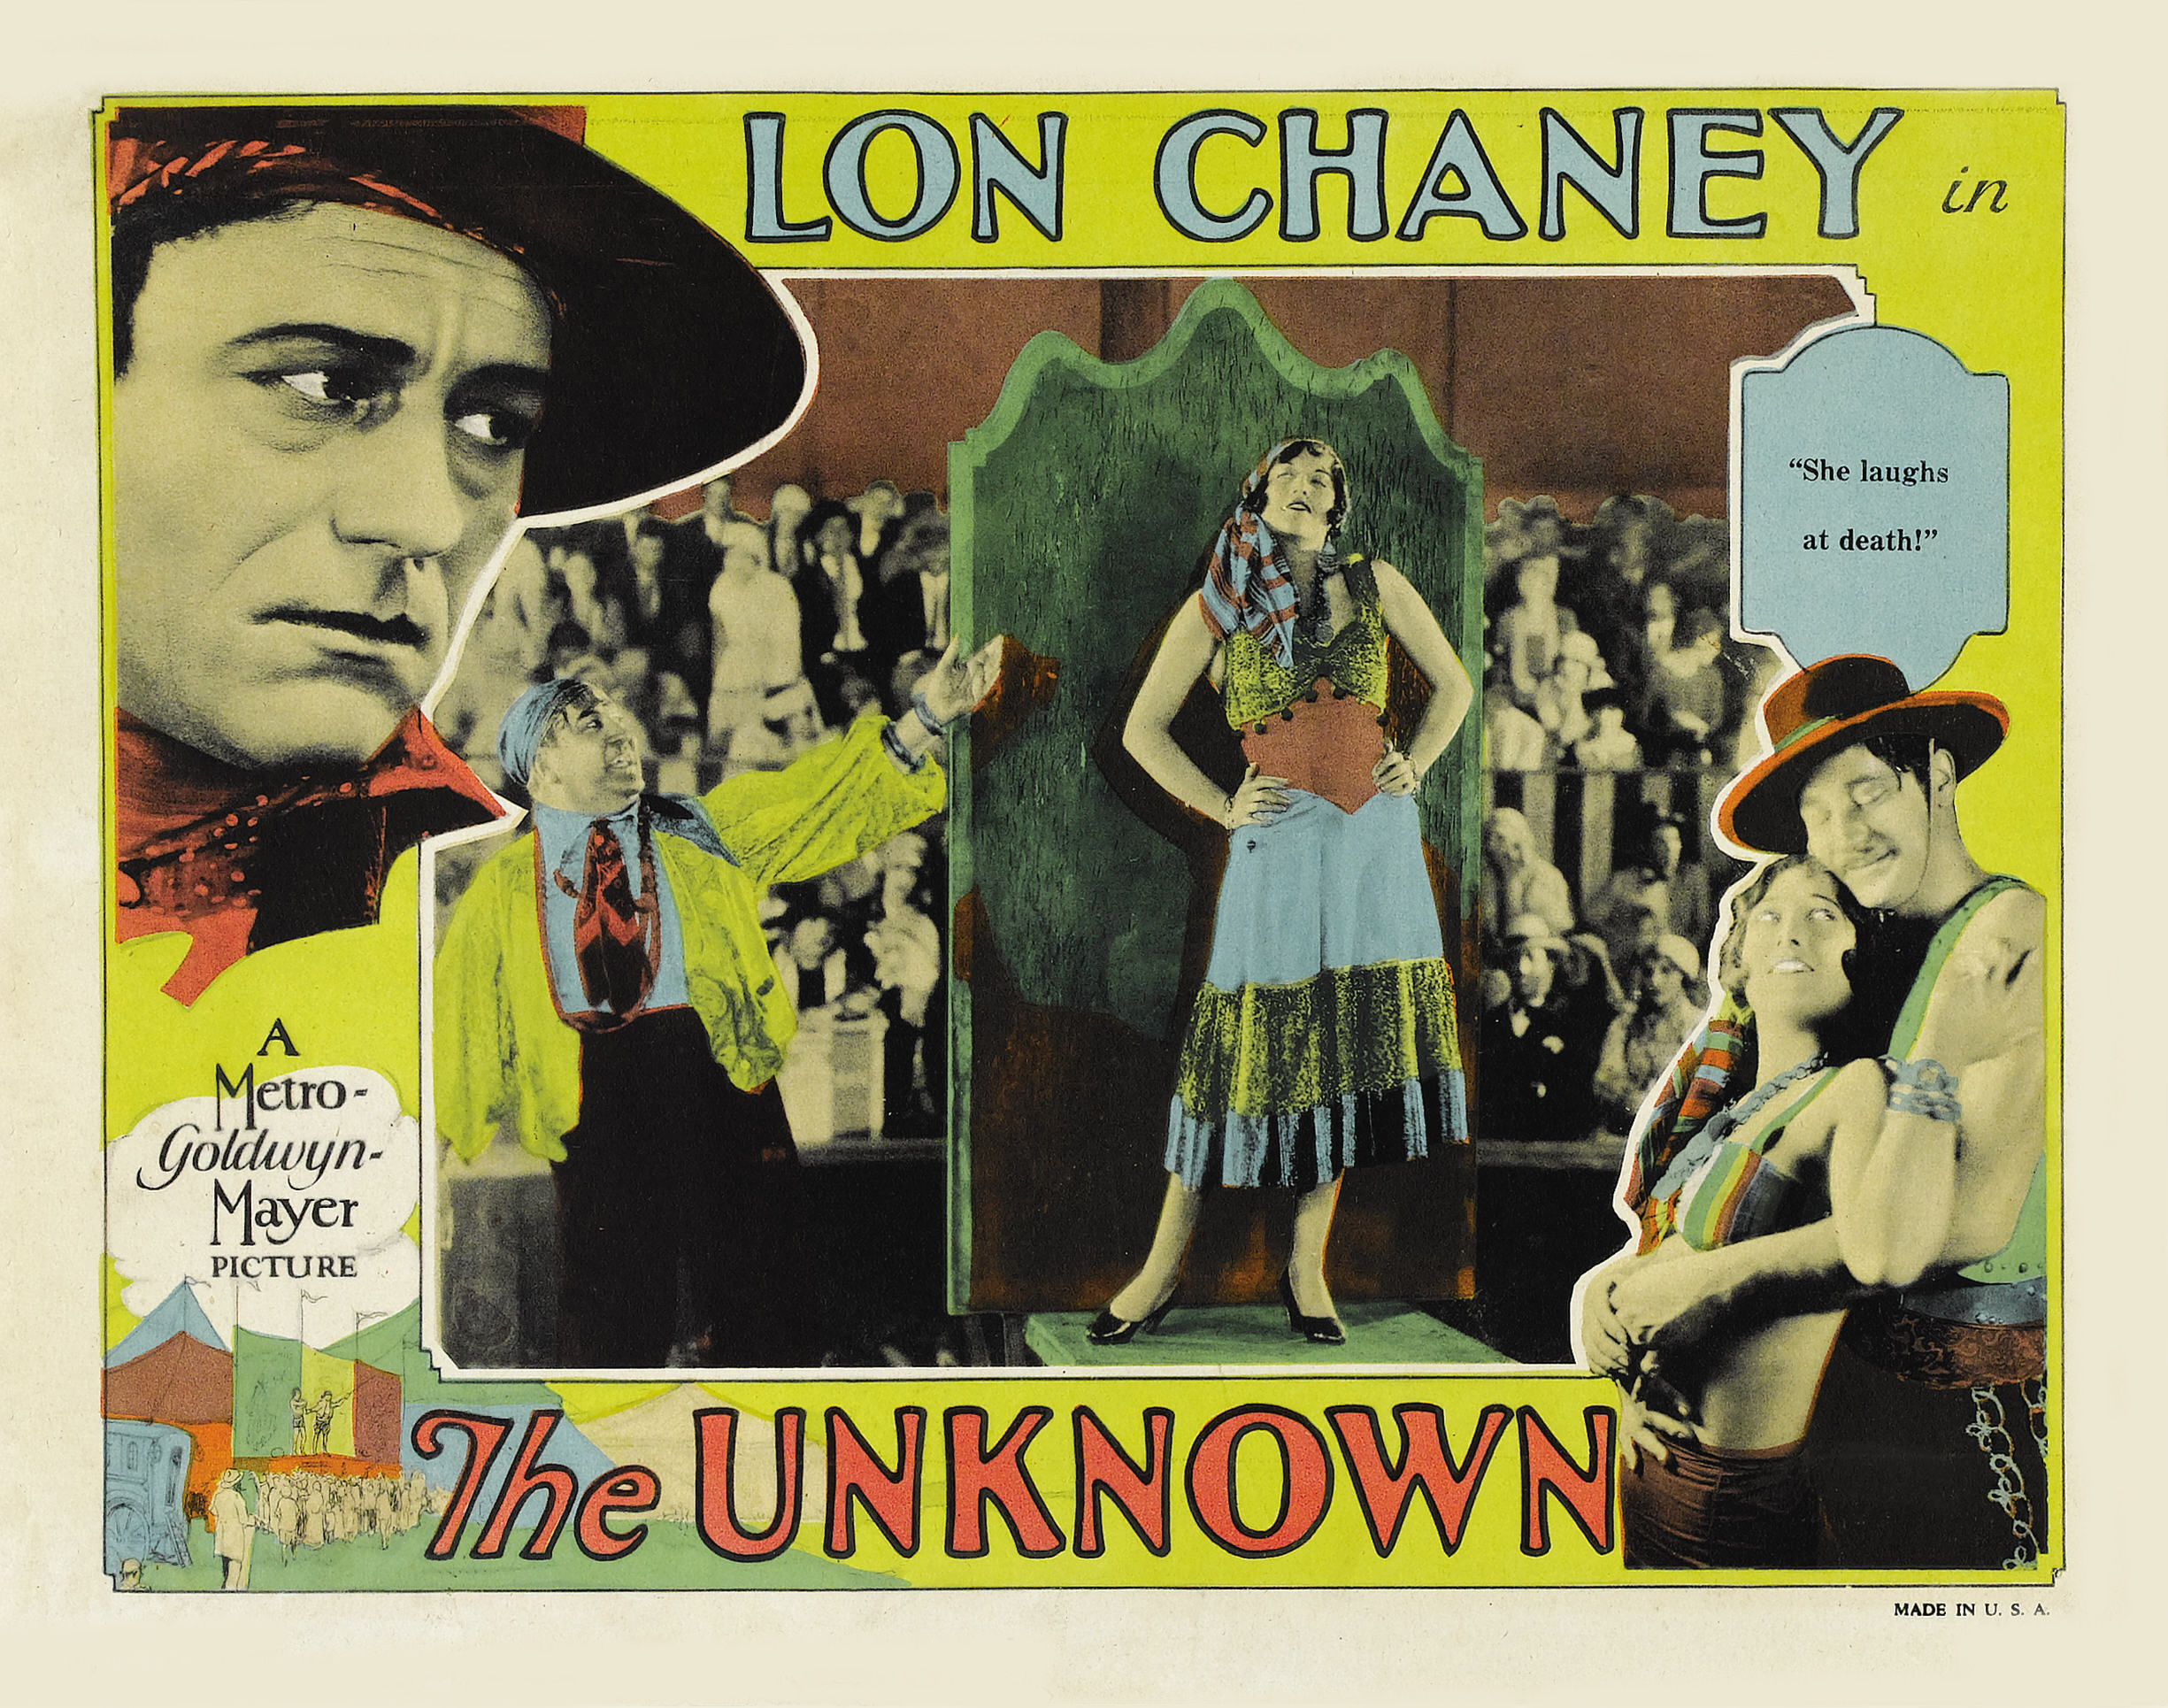 Poster%20-%20Unknown,%20The%20(1927)_02.jpg